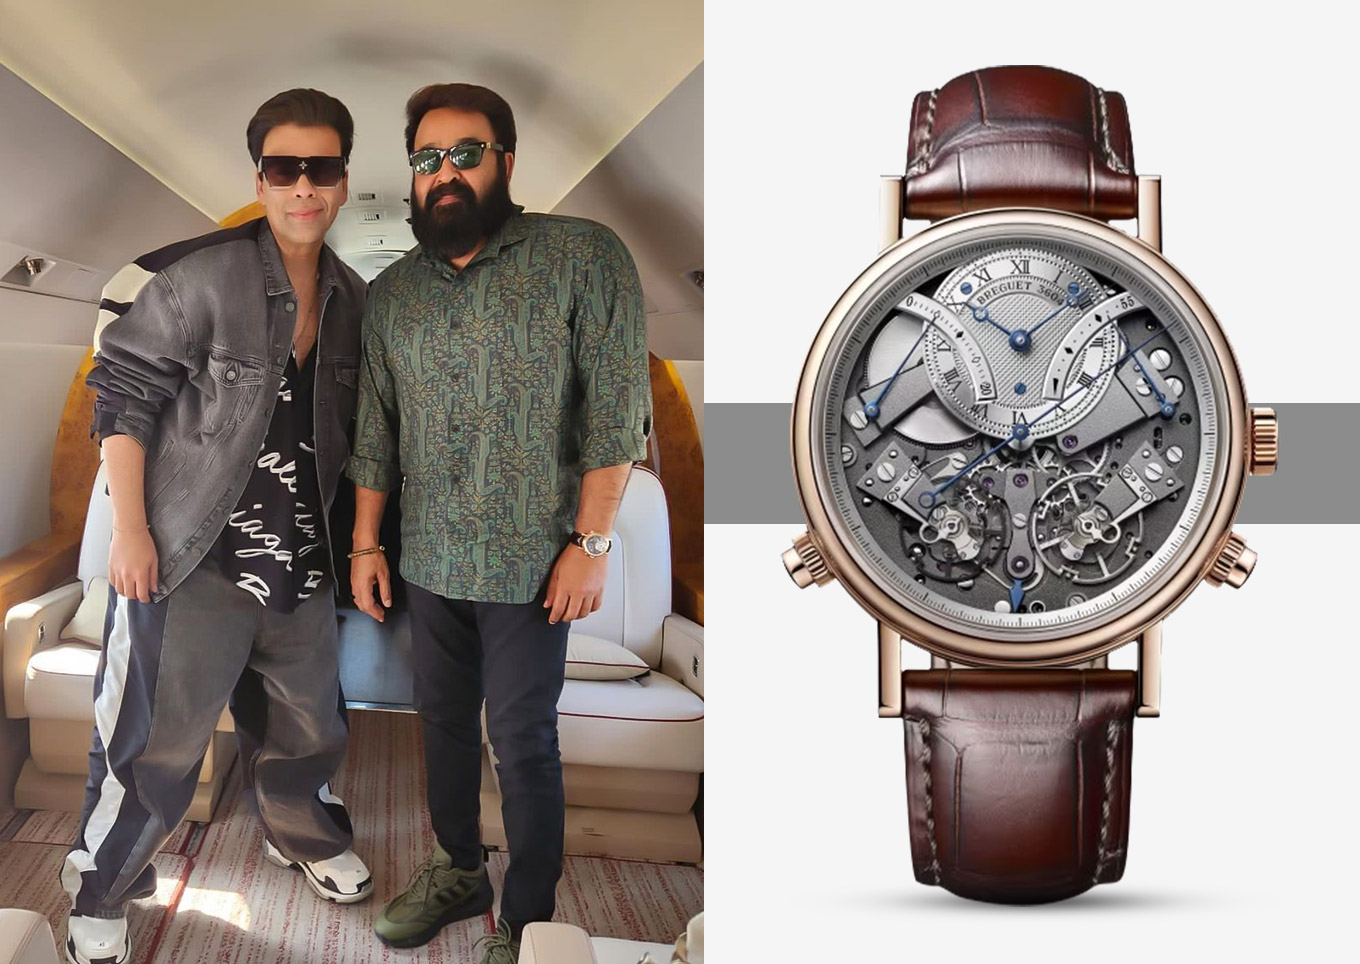 South Indian Actor Mohanlal wearing a Breguet Tradition